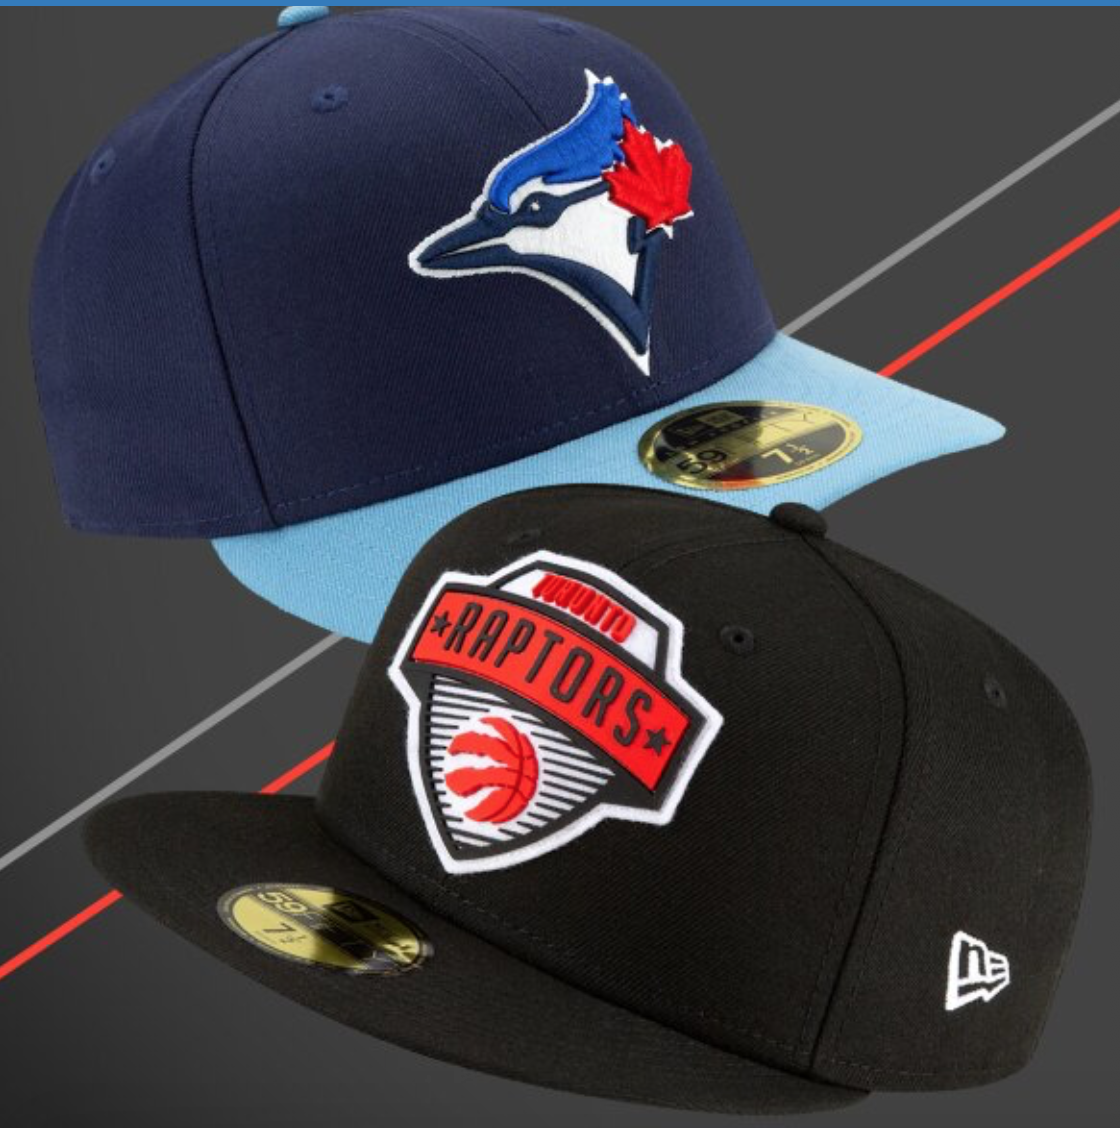 Lids Canada Sale: 25% Off Orders of $29 Or More Using Promo Code ...